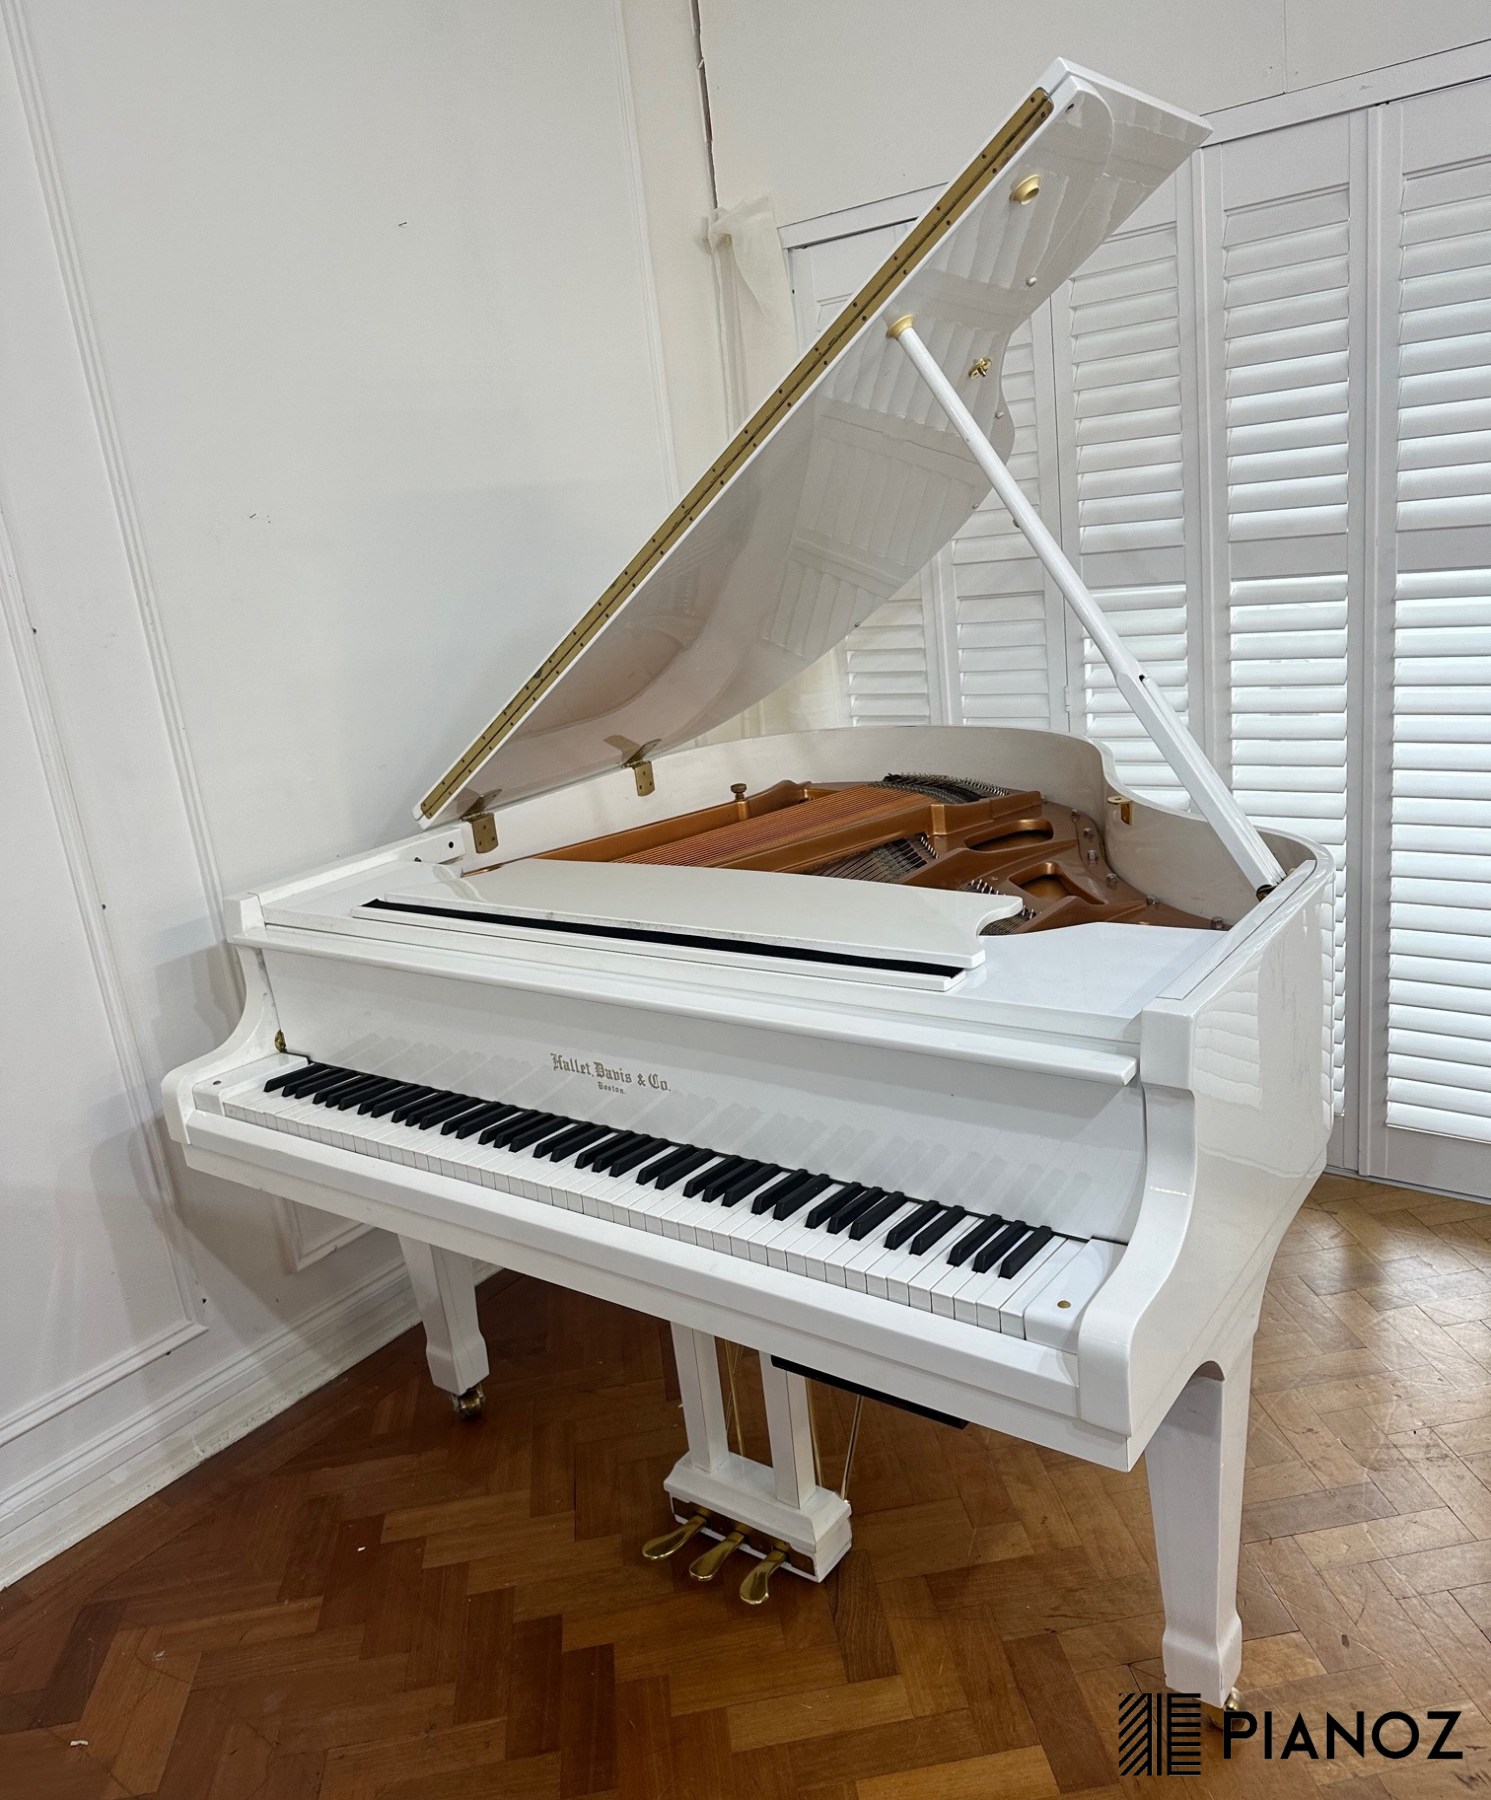 Hallet Davis White Self Playing Baby Grand Piano piano for sale in UK